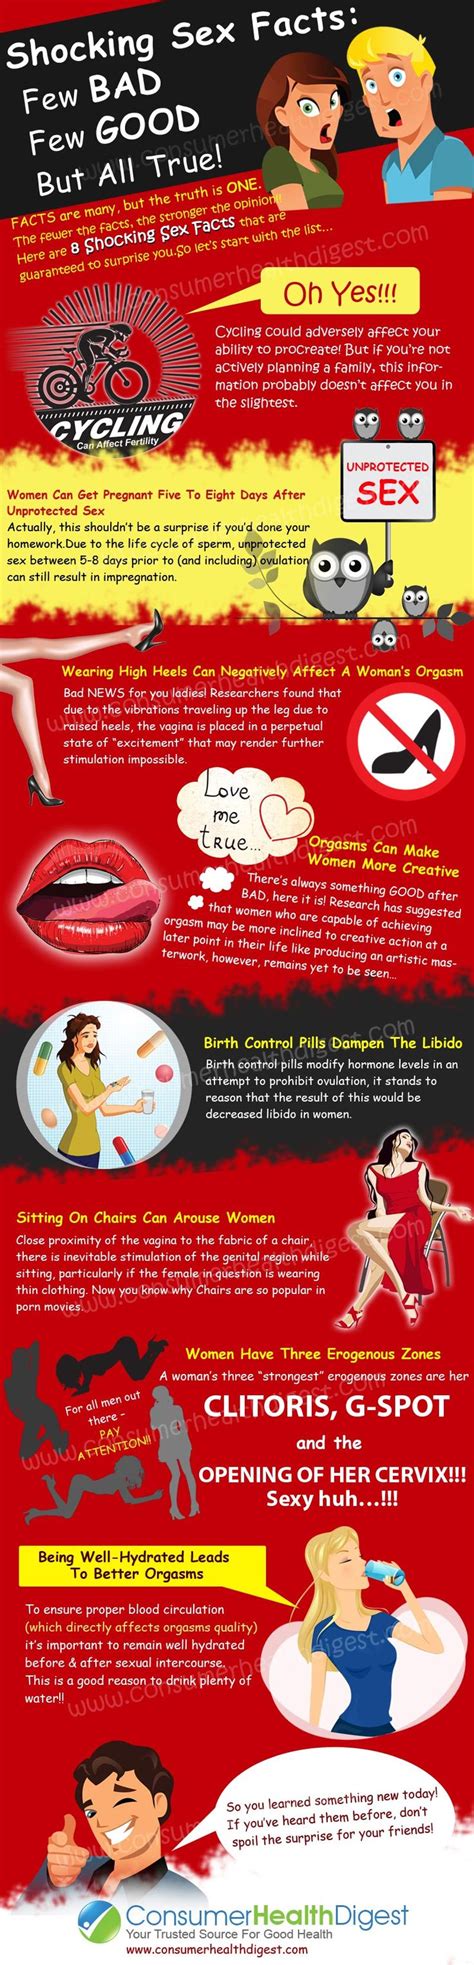 66 best images about fun sex facts on pinterest your brain right guy and facts